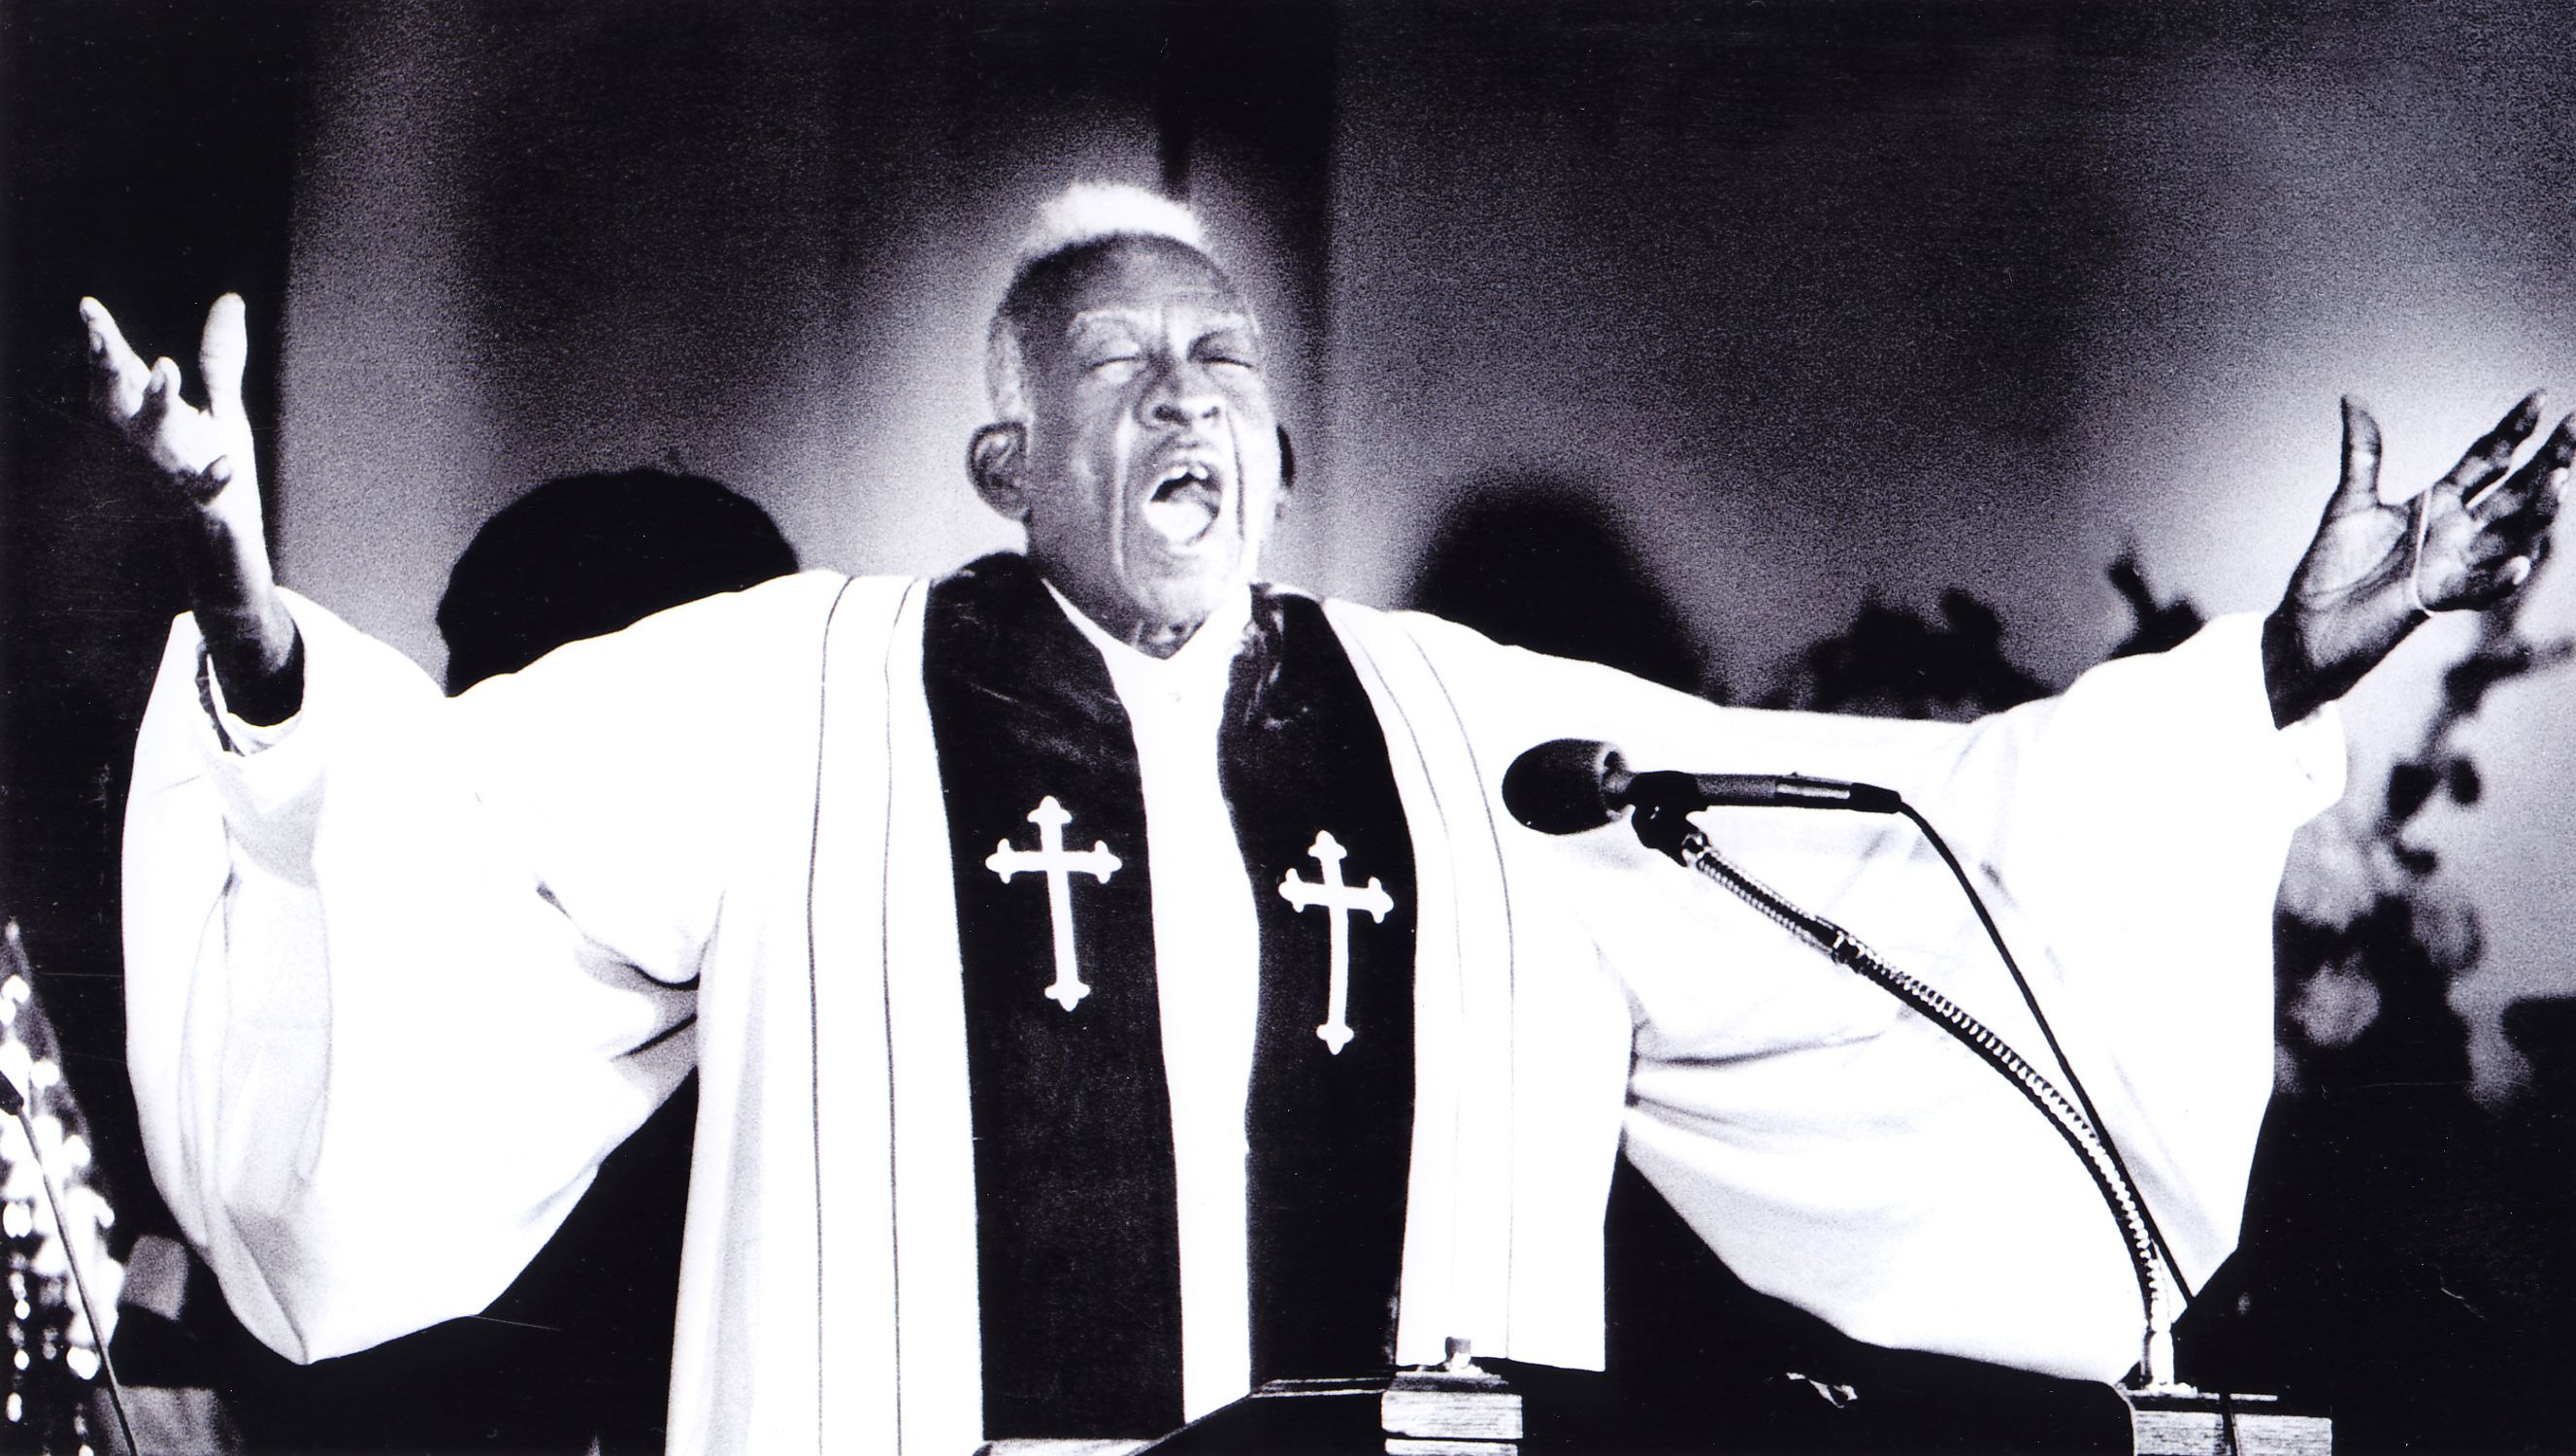 Gospel singer Thomas Dorsey performing "This Far by Faith" at Bible Way | Source: Getty Images